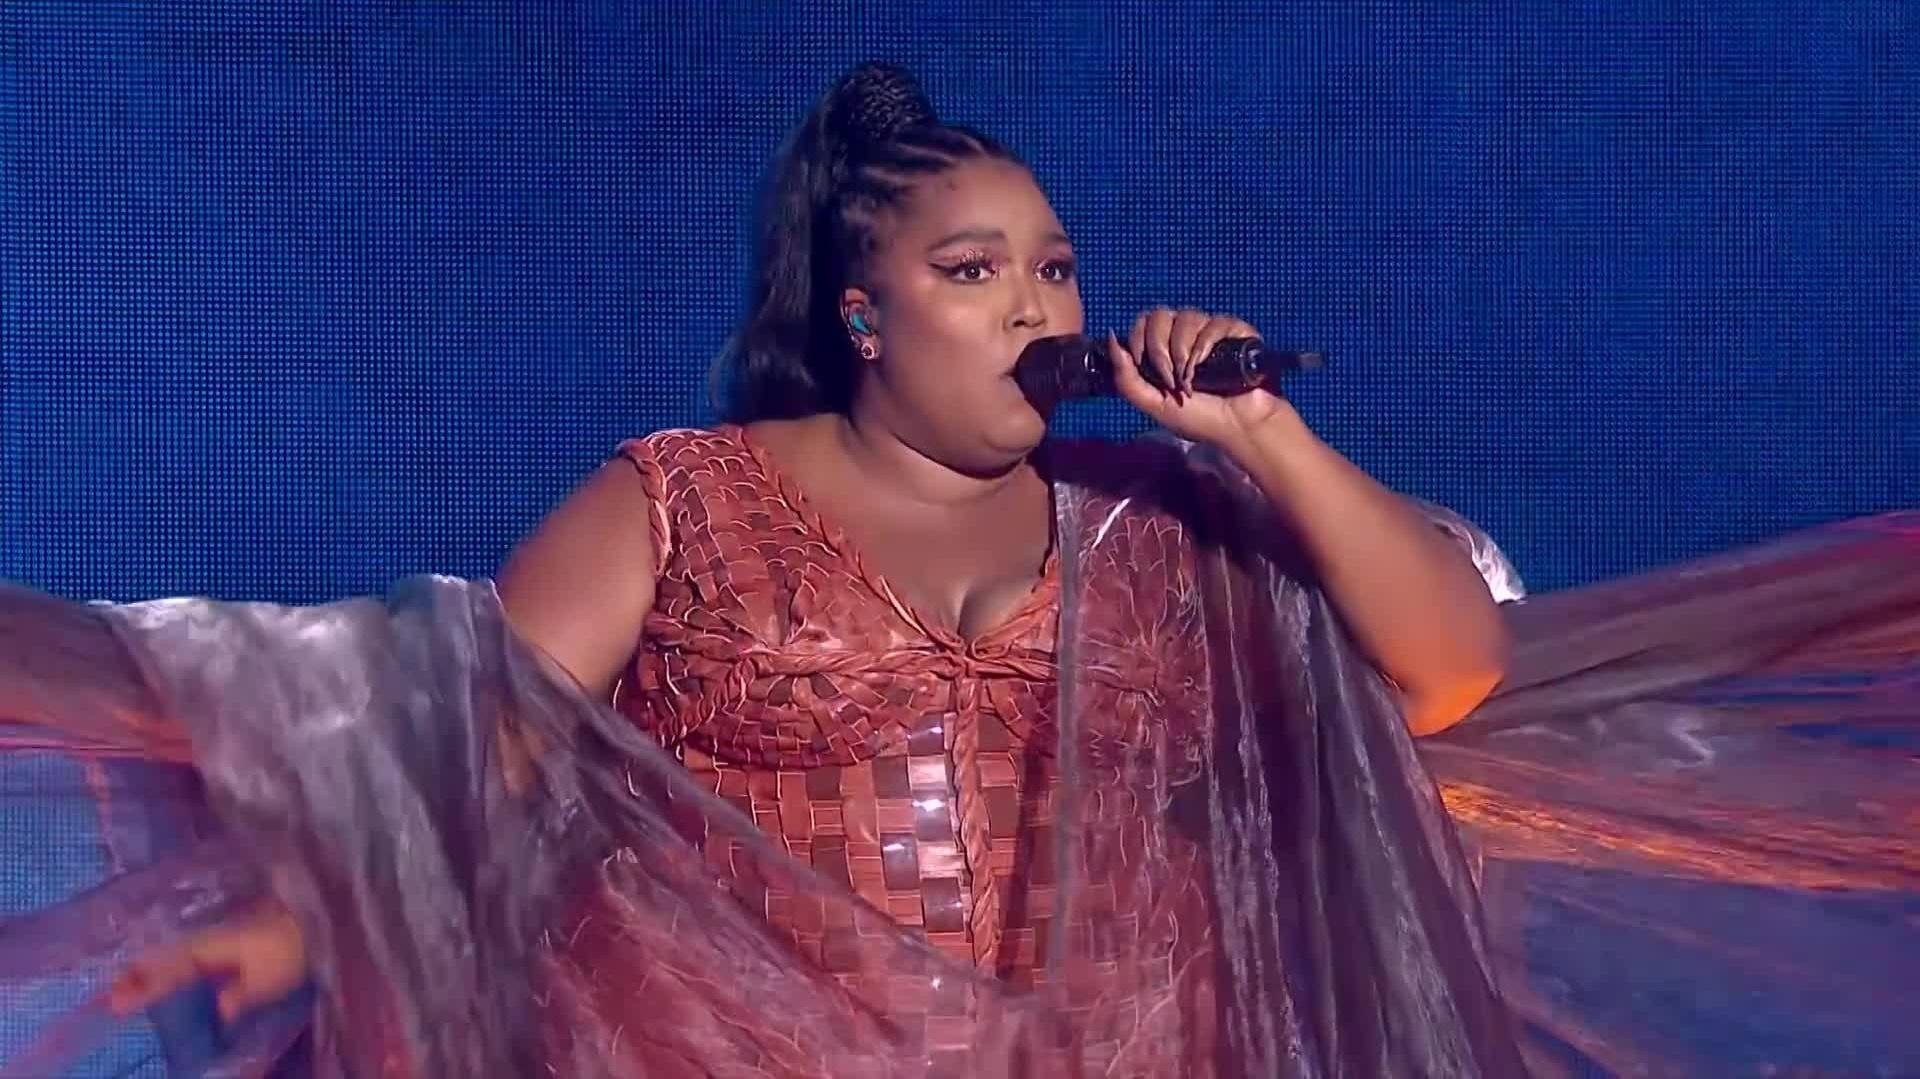 Lizzo - Cuz I Love You / Truth Hurts / Good As Hell / Juice (Live at the BRITs 2020)